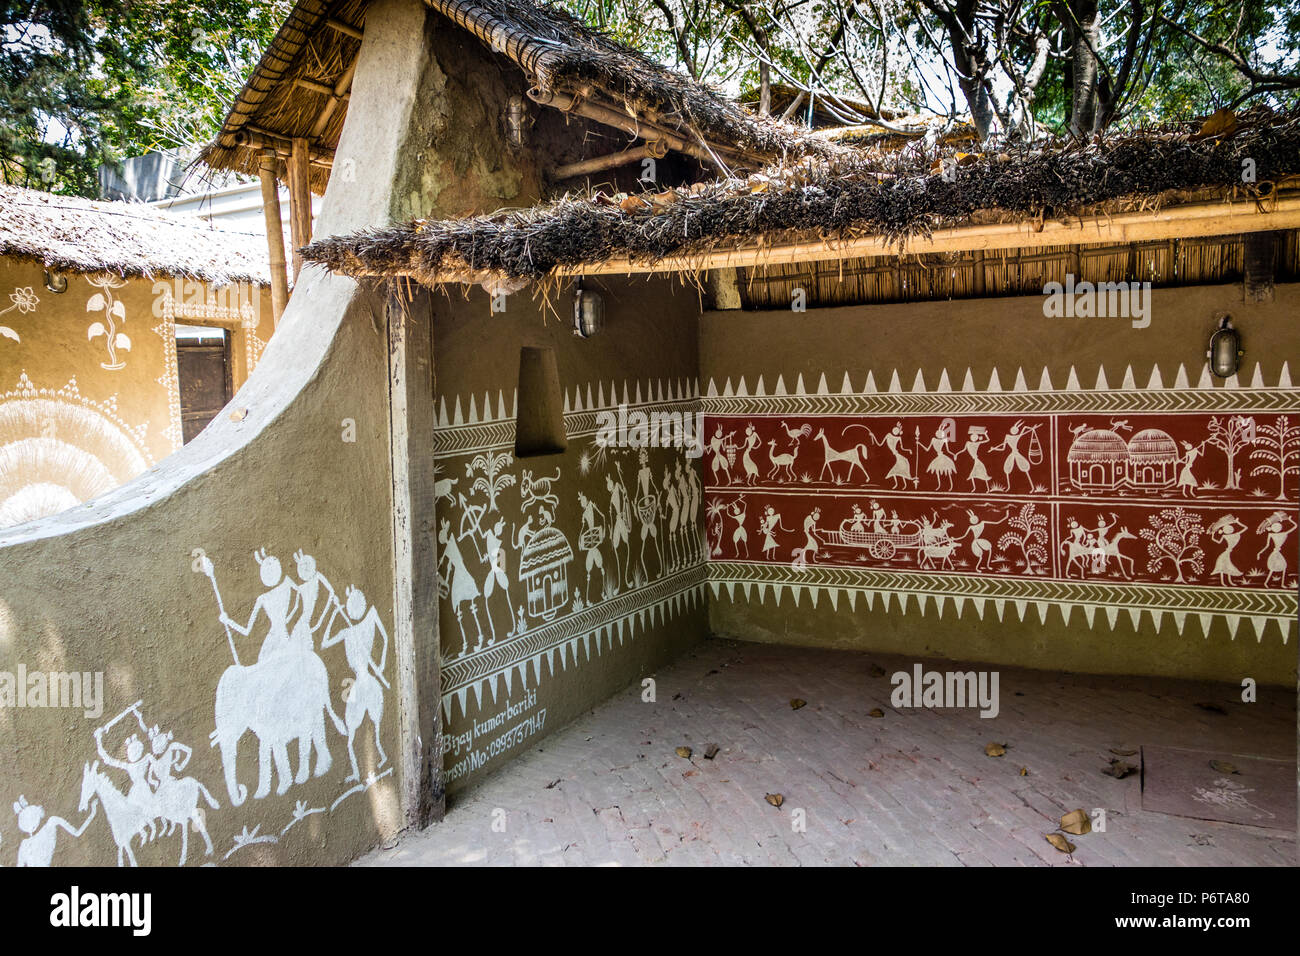 Exhibit of wall paintings on an Odisha Courtyard, National Crafts Museum, New Delhi, Delhi, India Stock Photo